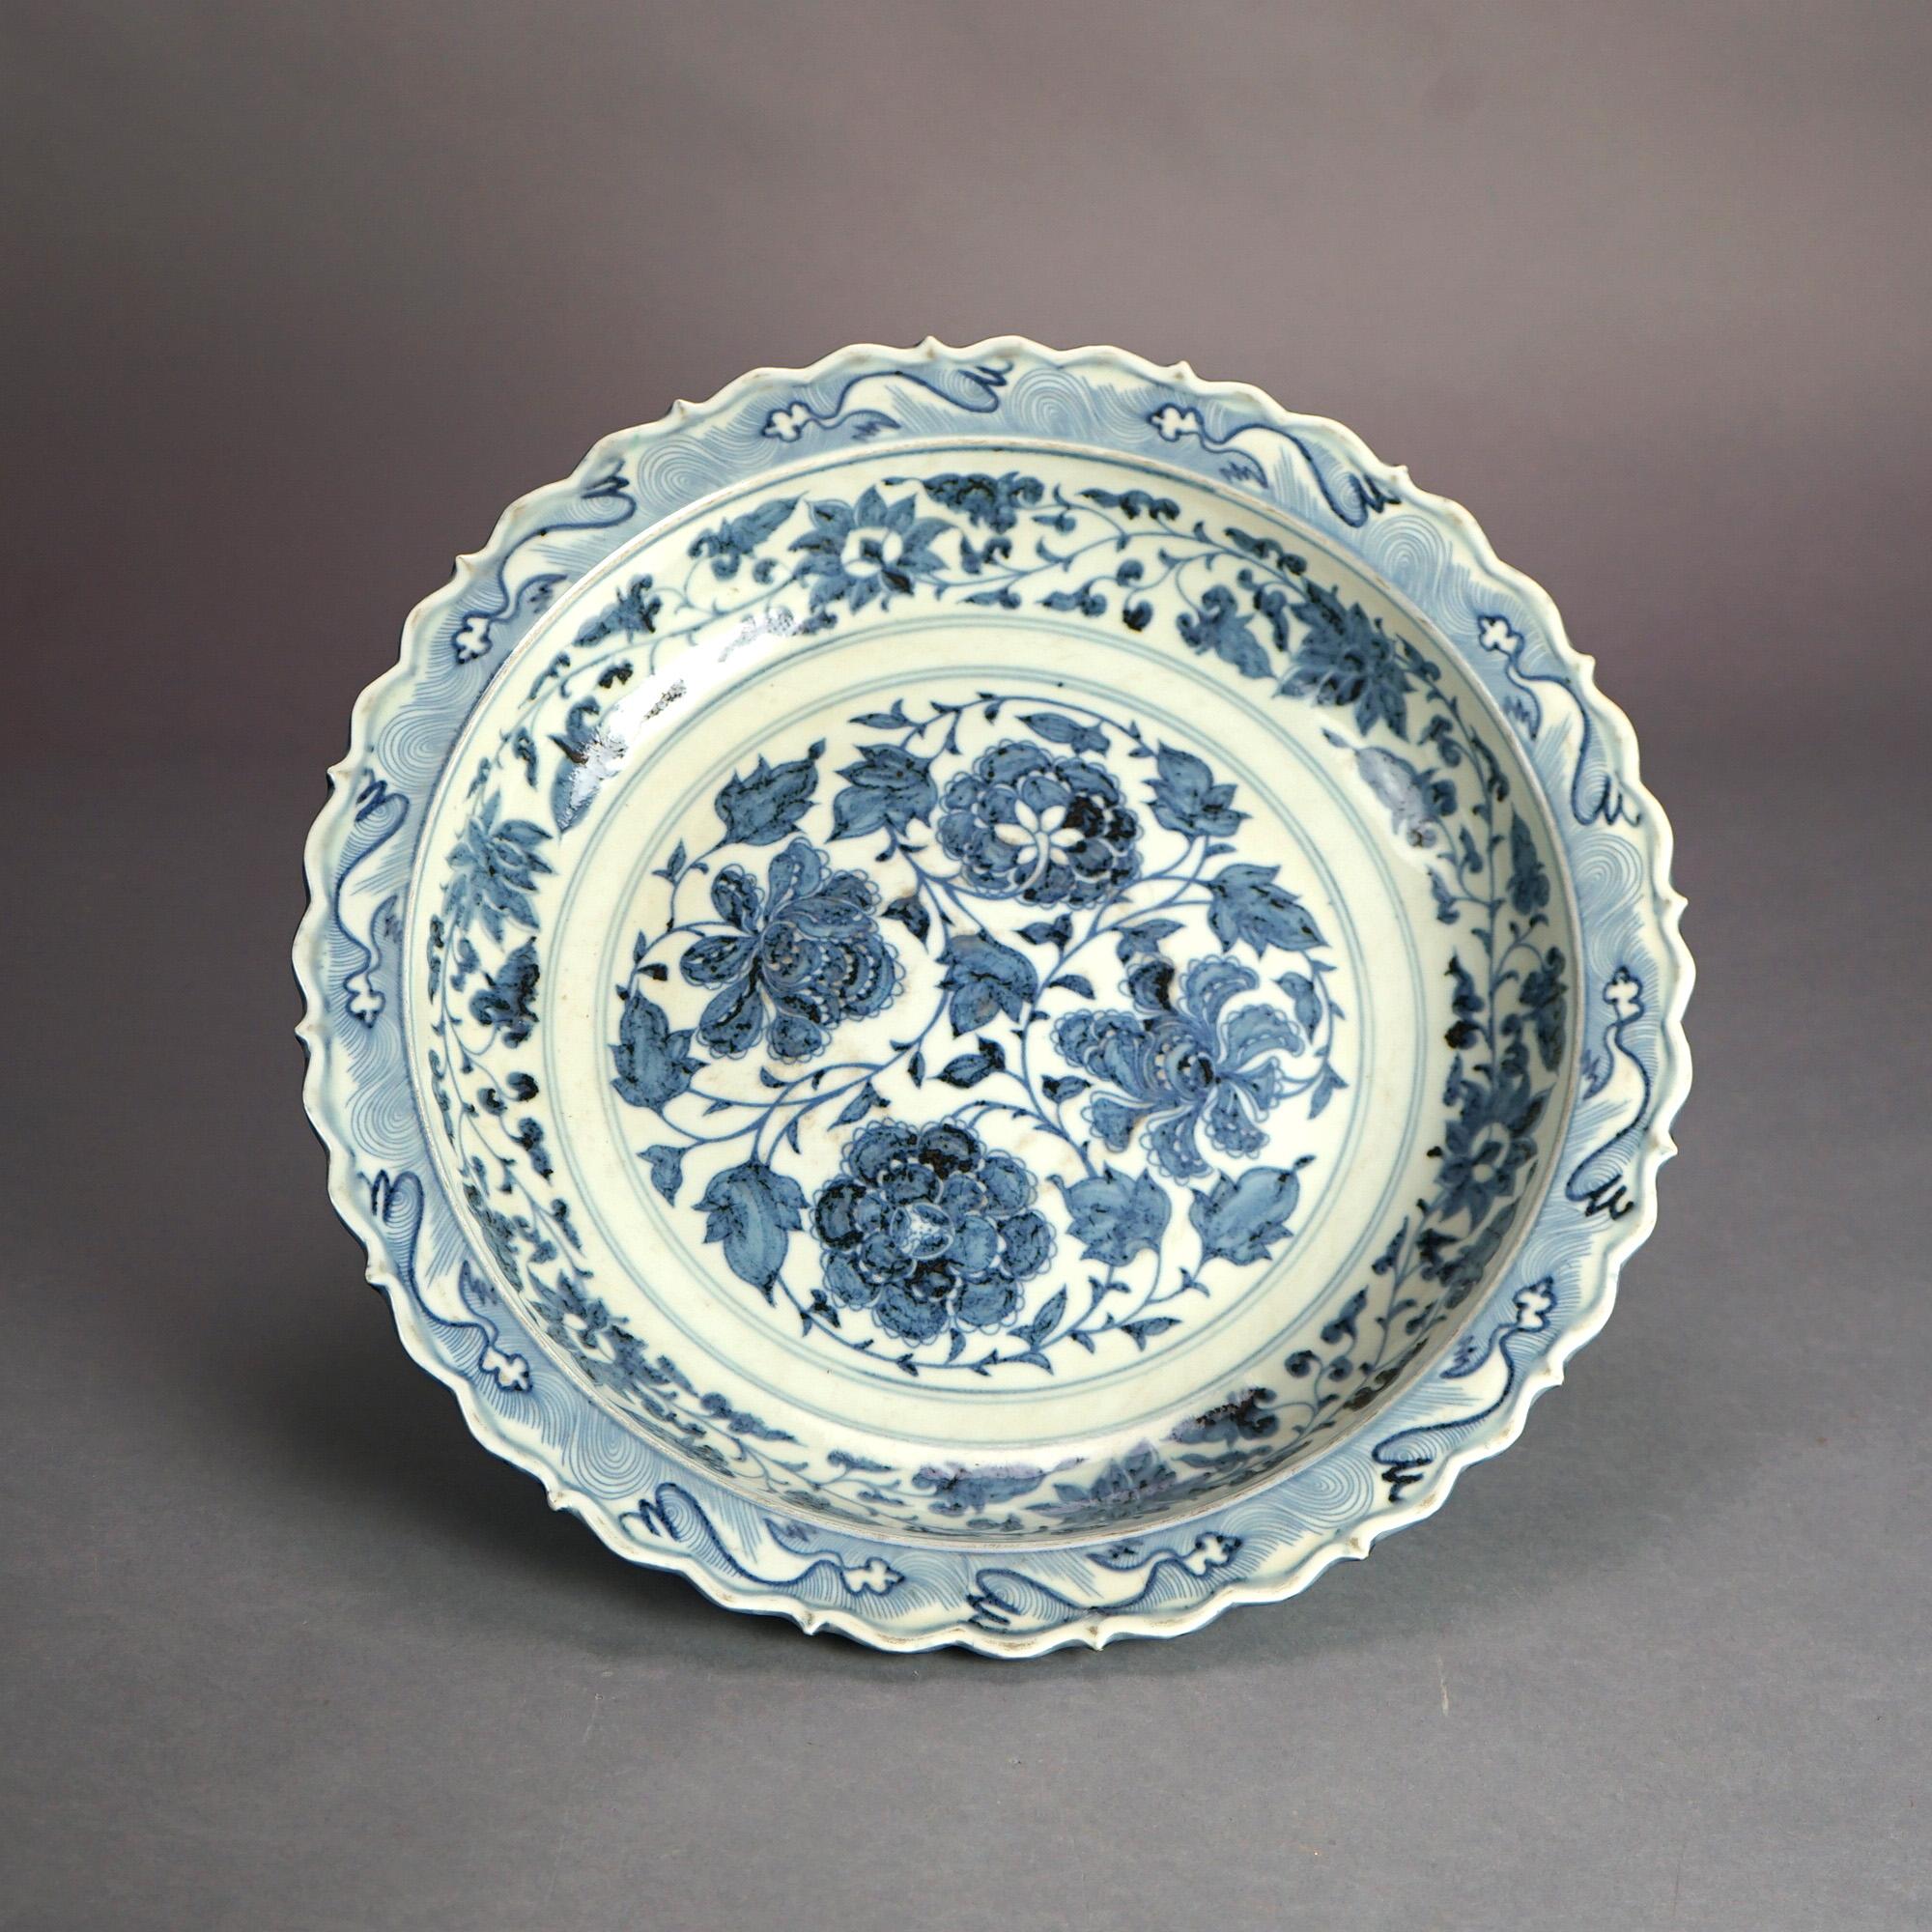 Large Chinese Blue & White Floral Design Porcelain Charger Bowl with Stylized Wave Rim 20th

Measures- 3.25''H x 17.75''W x 17.75''D